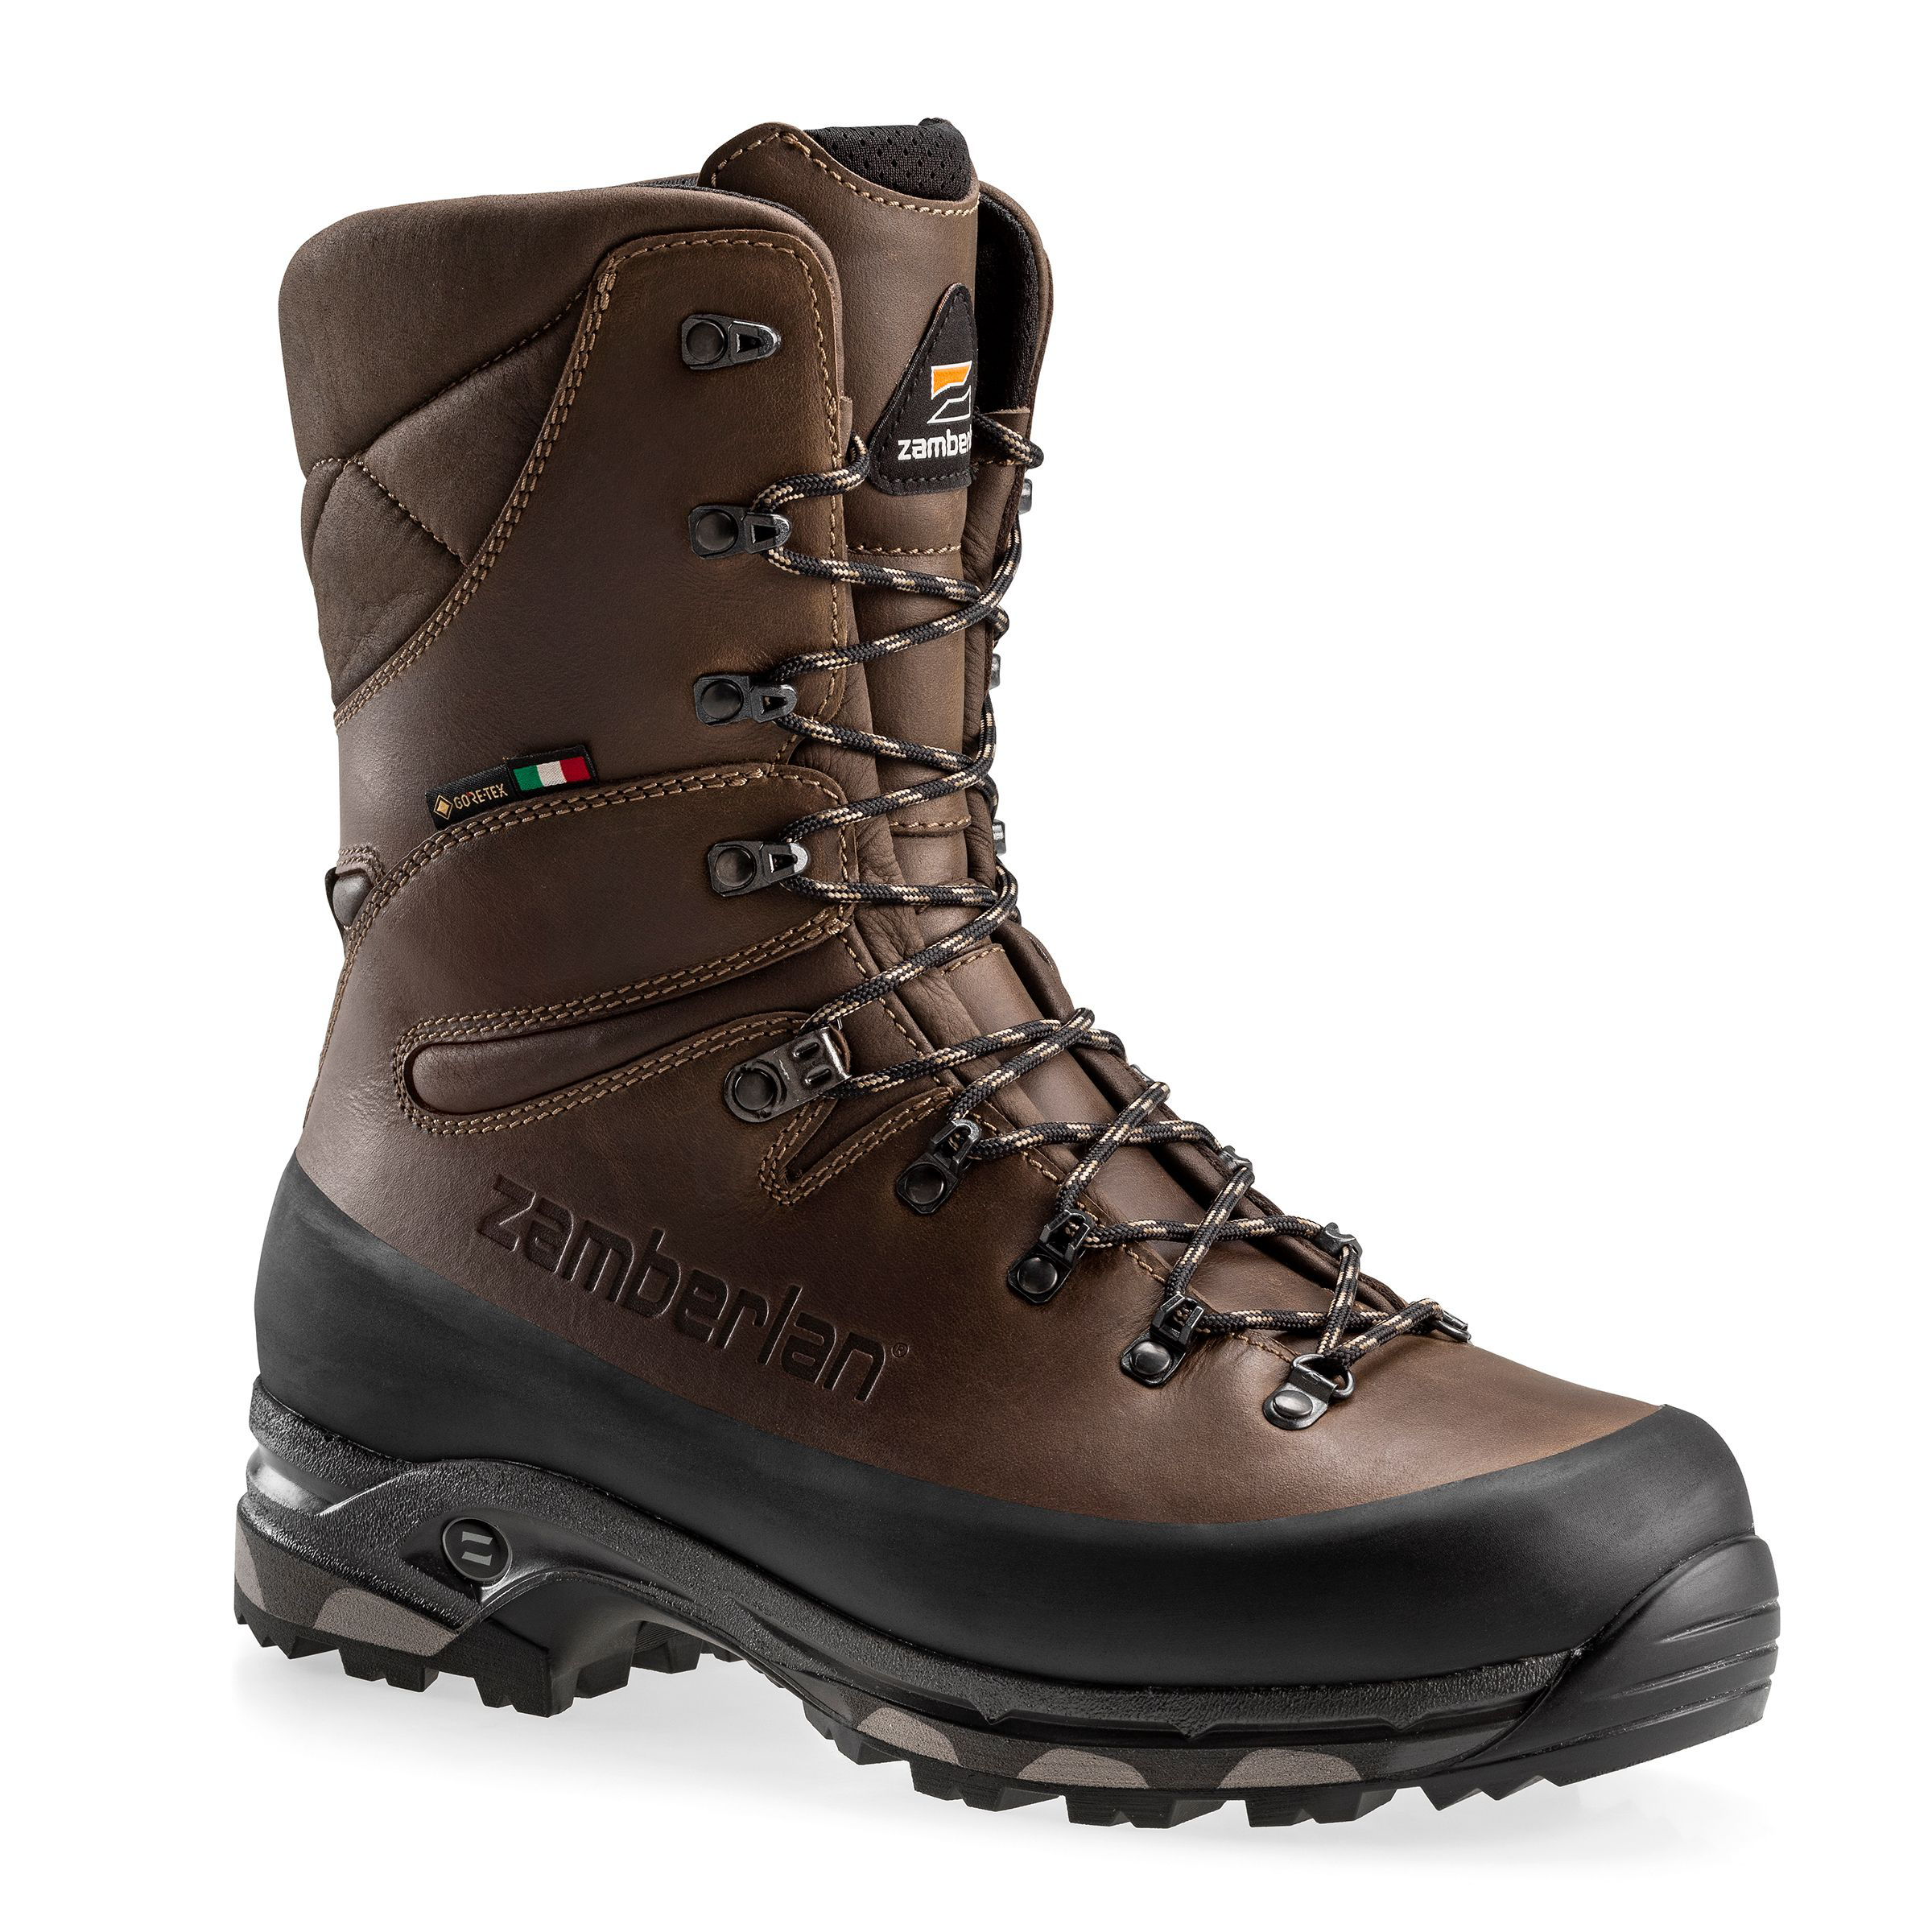 Zamberlan 1005 Hunter Pro GTX RR WL GORE-TEX Insulated Hunting Boots for Men - Brown - 9W